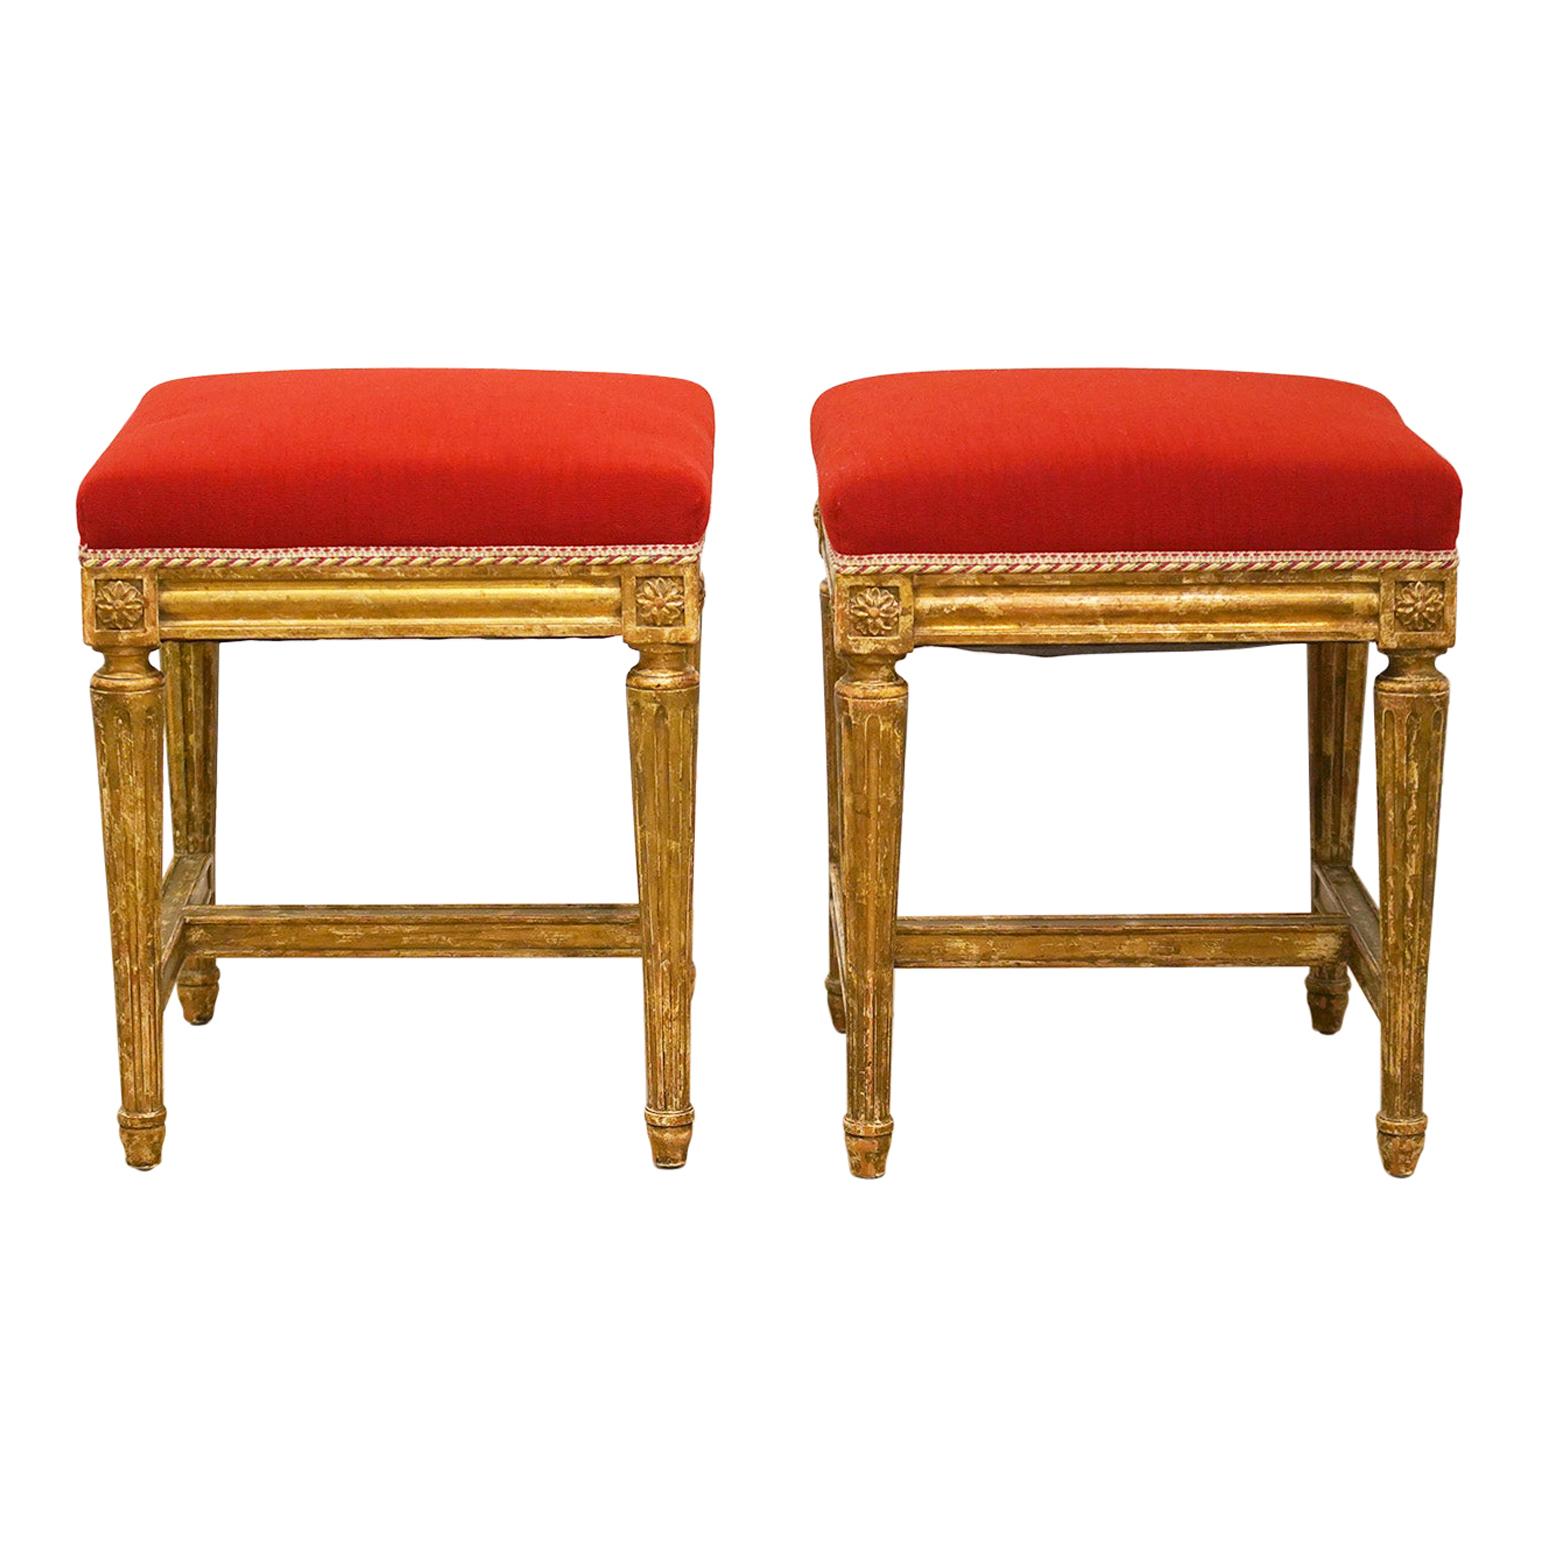 Pair of French Louis XVI Style Paint and Gilt Upholstered Benches or Stools